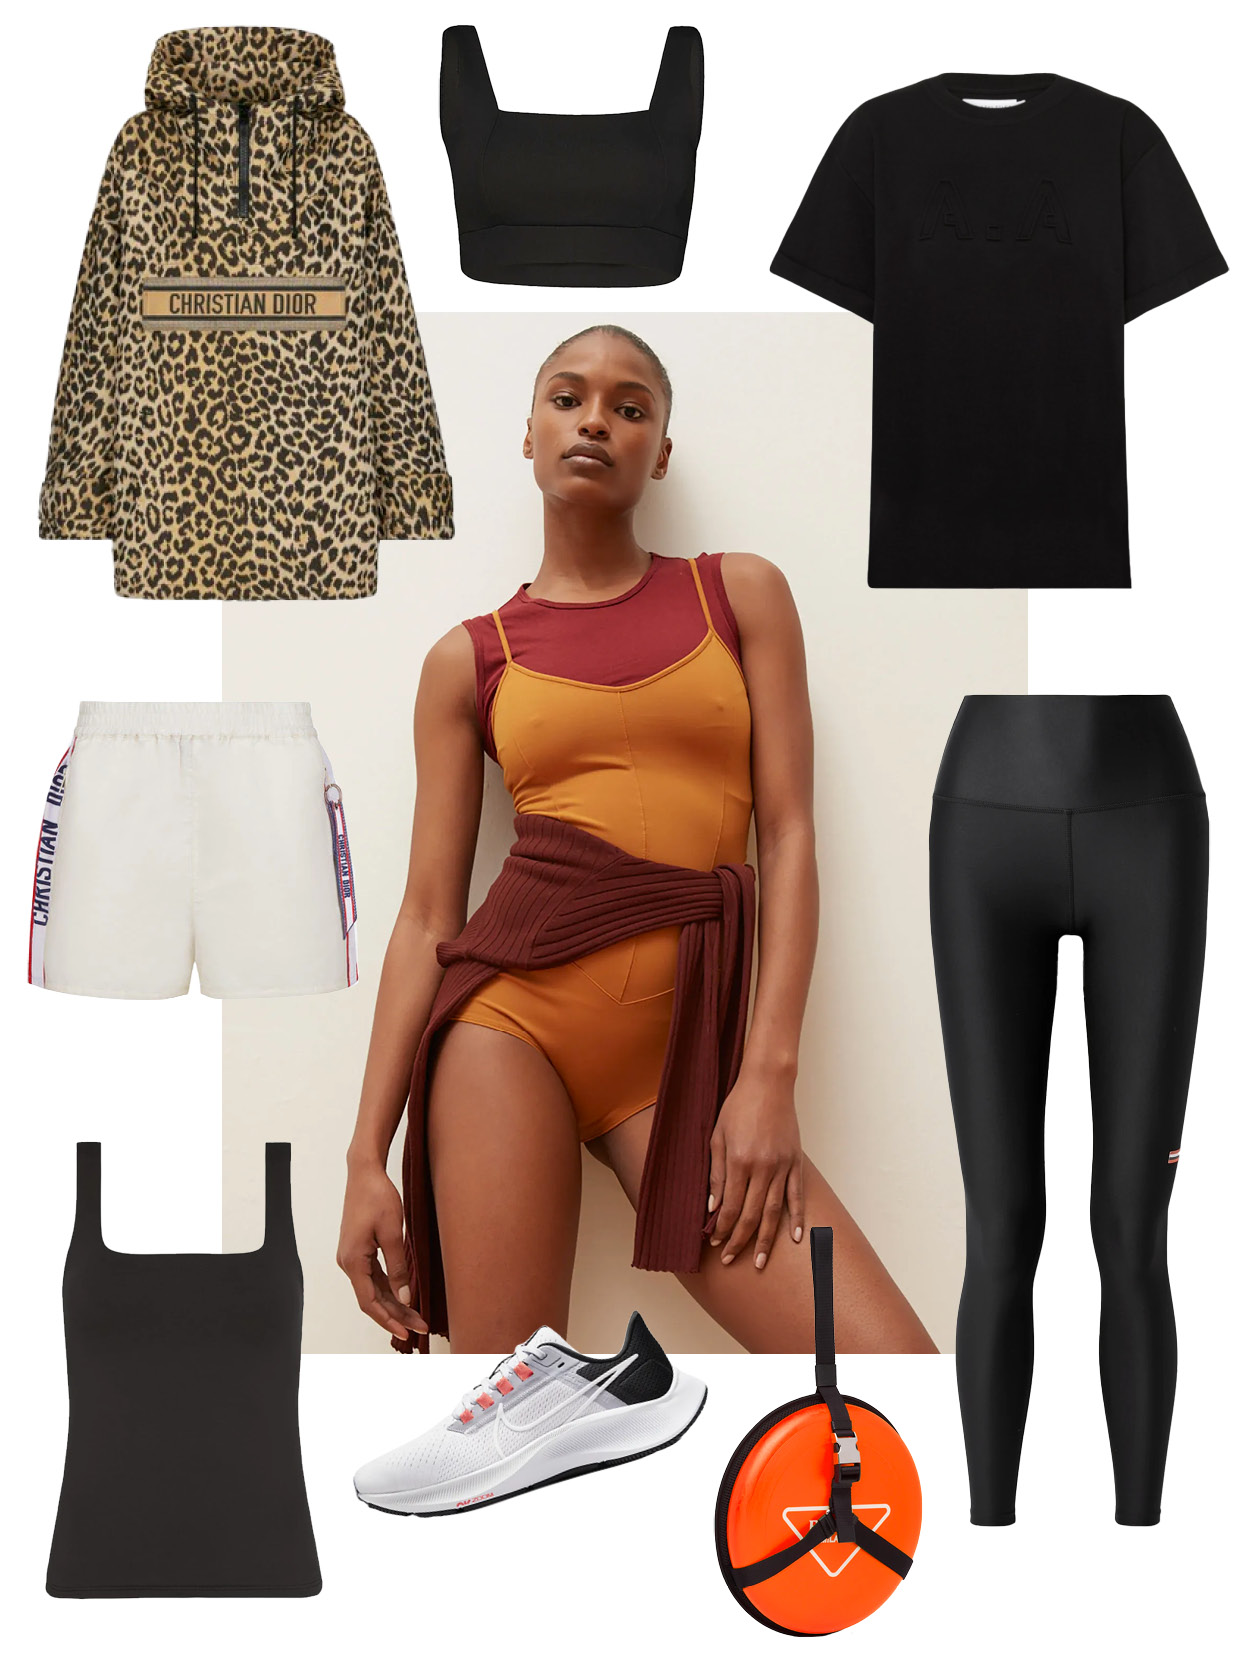 Chic and sleek activewear to get you back in your gym groove